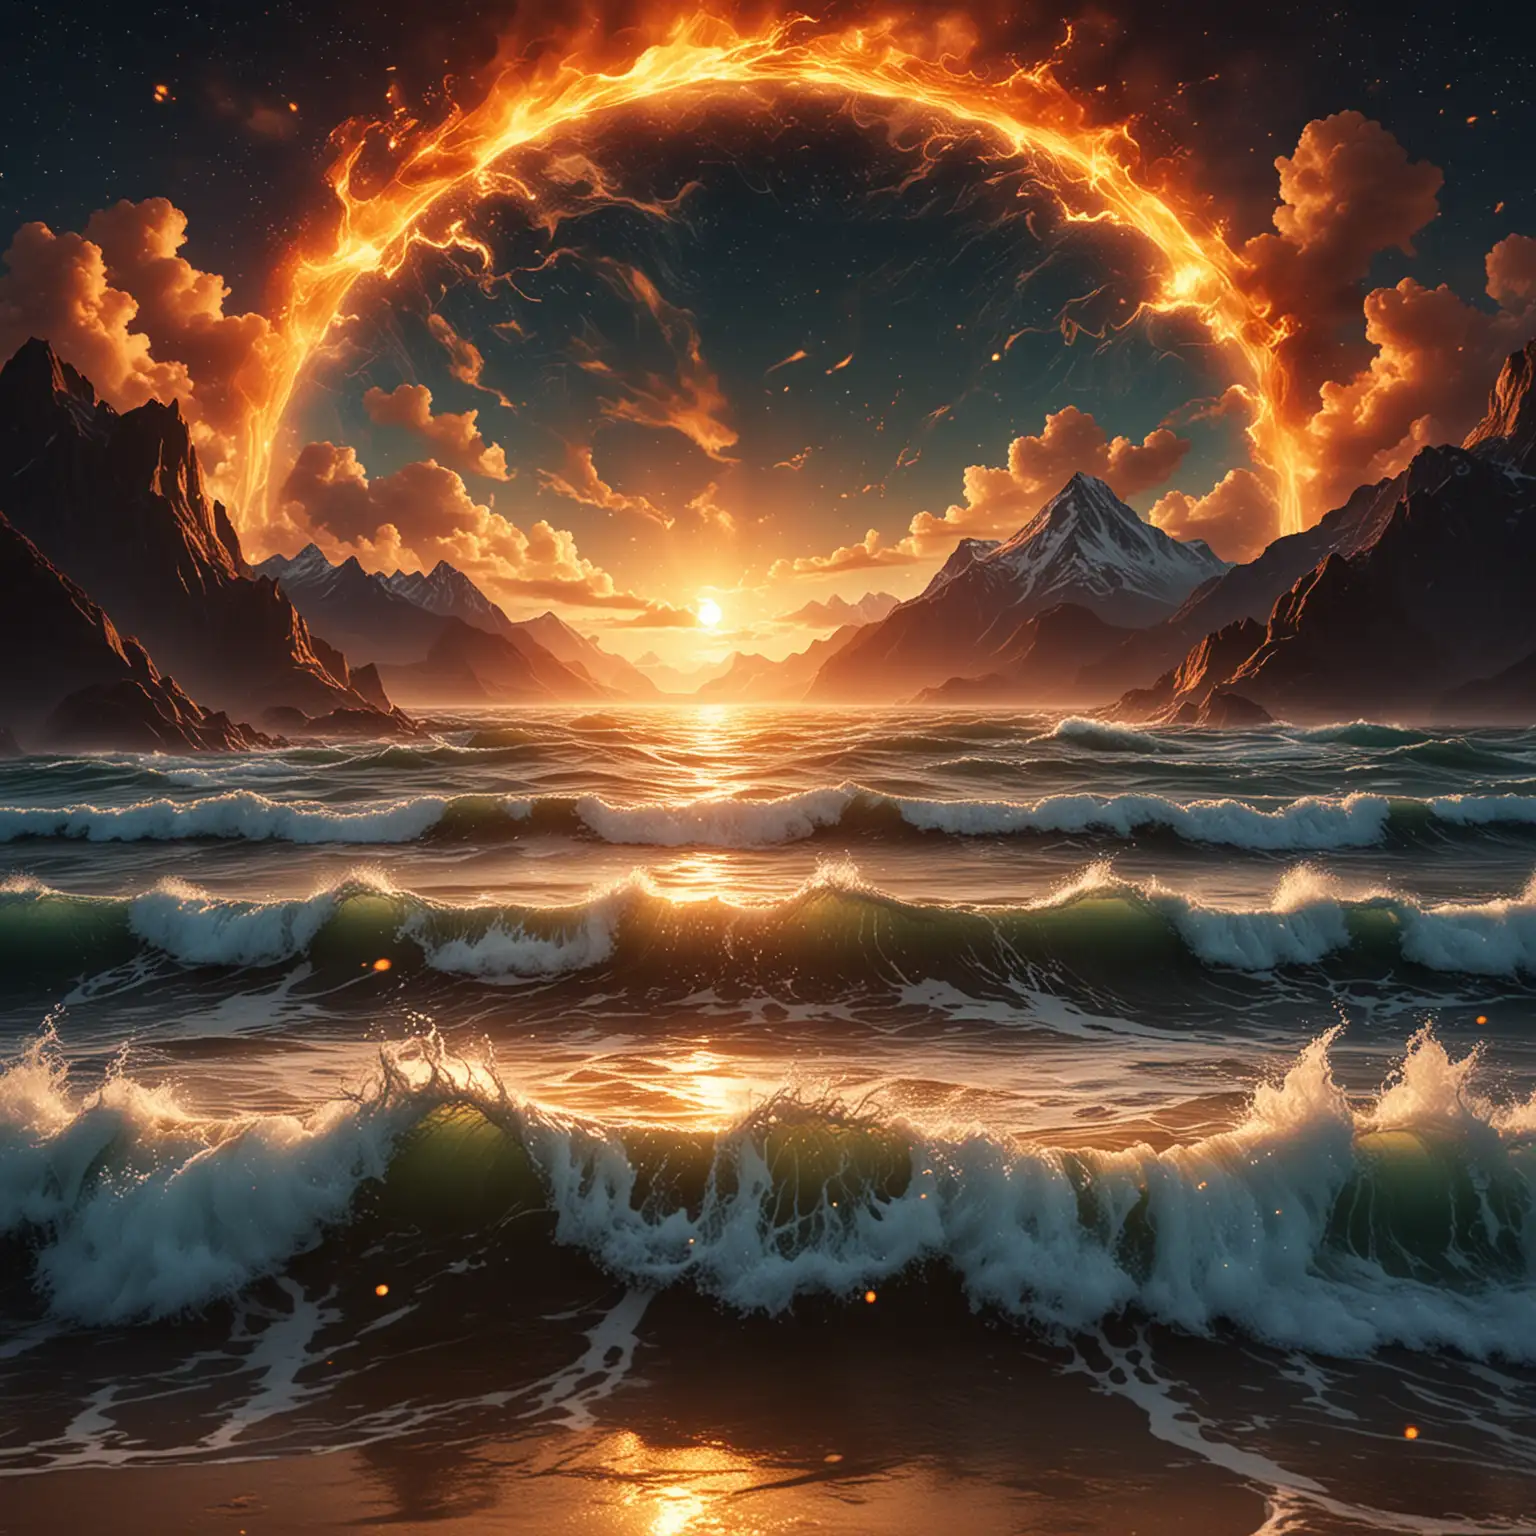 Flaming Waves at Night Ocean and Mountain Landscape with Cosmic Light